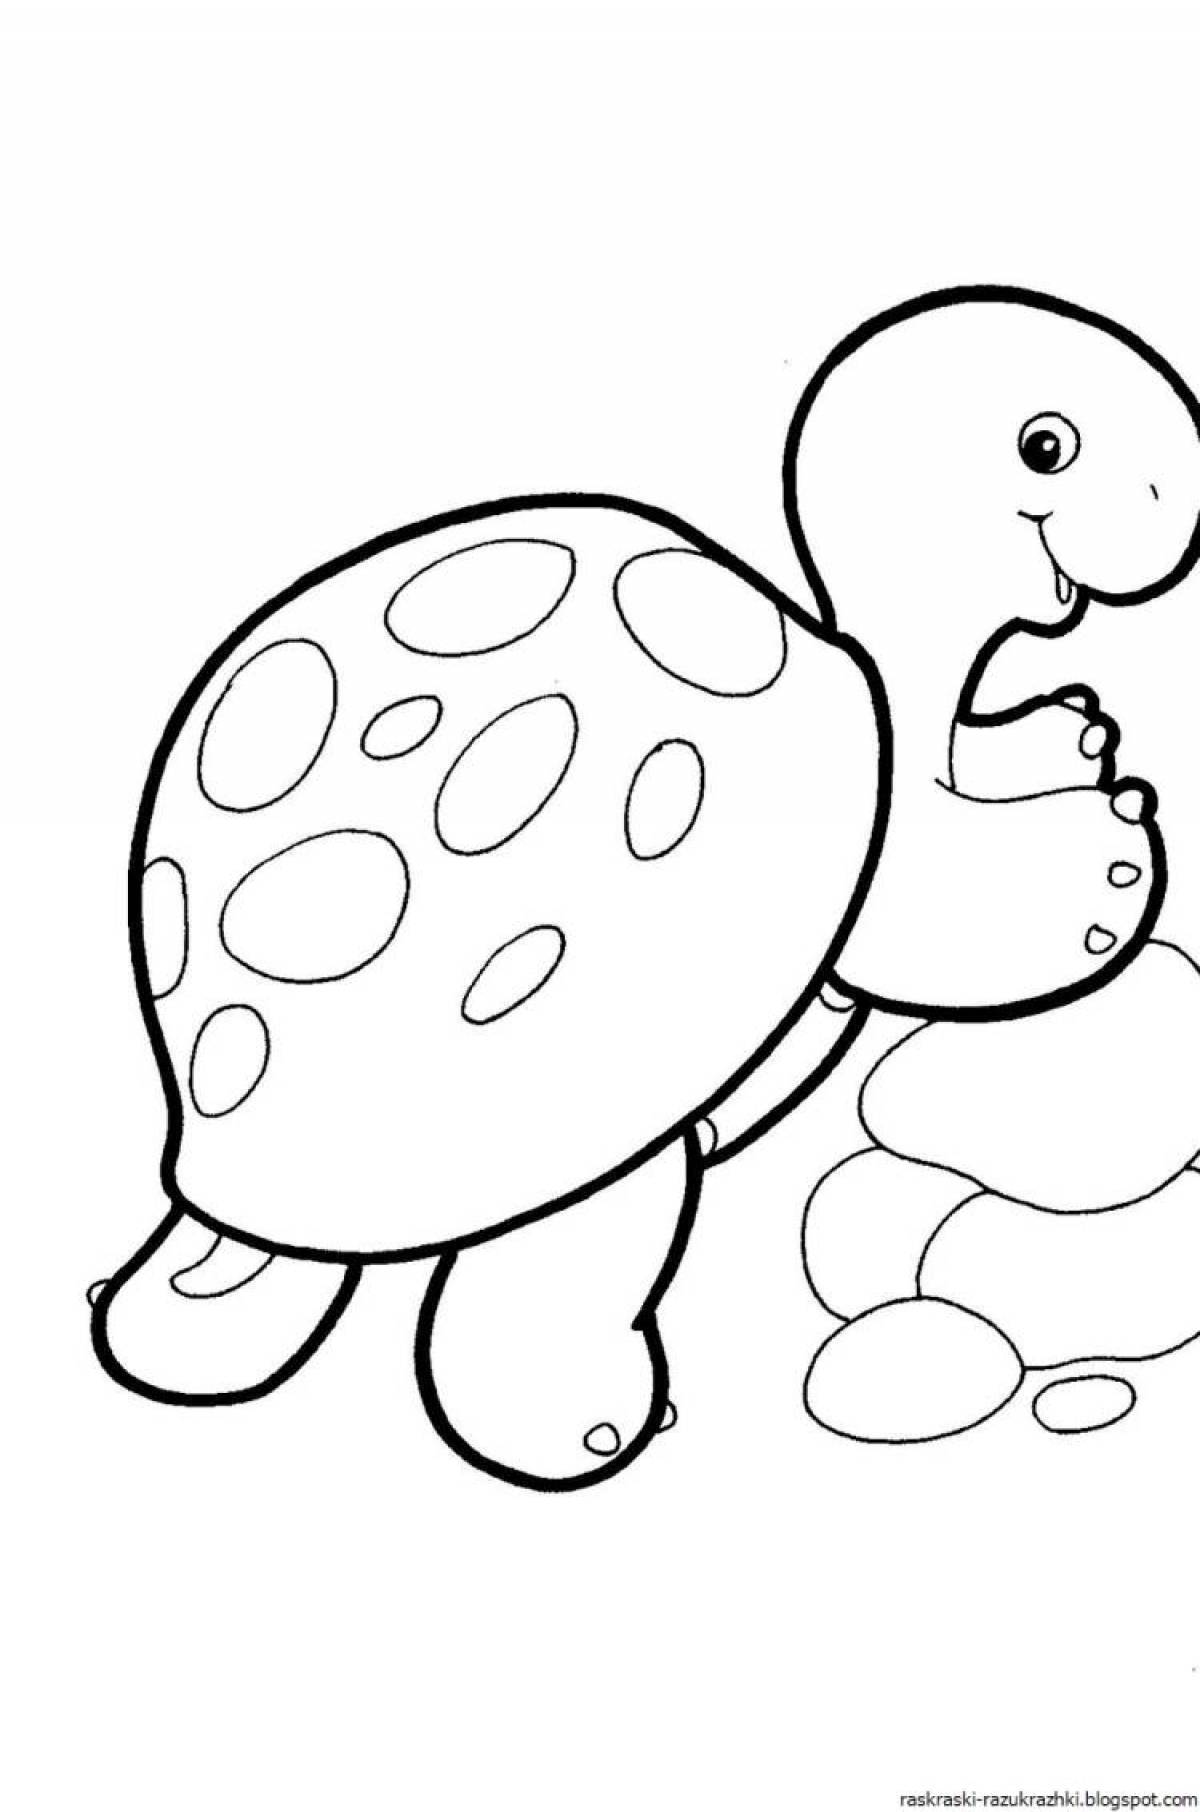 Fancy coloring for children 4-5 years old animals